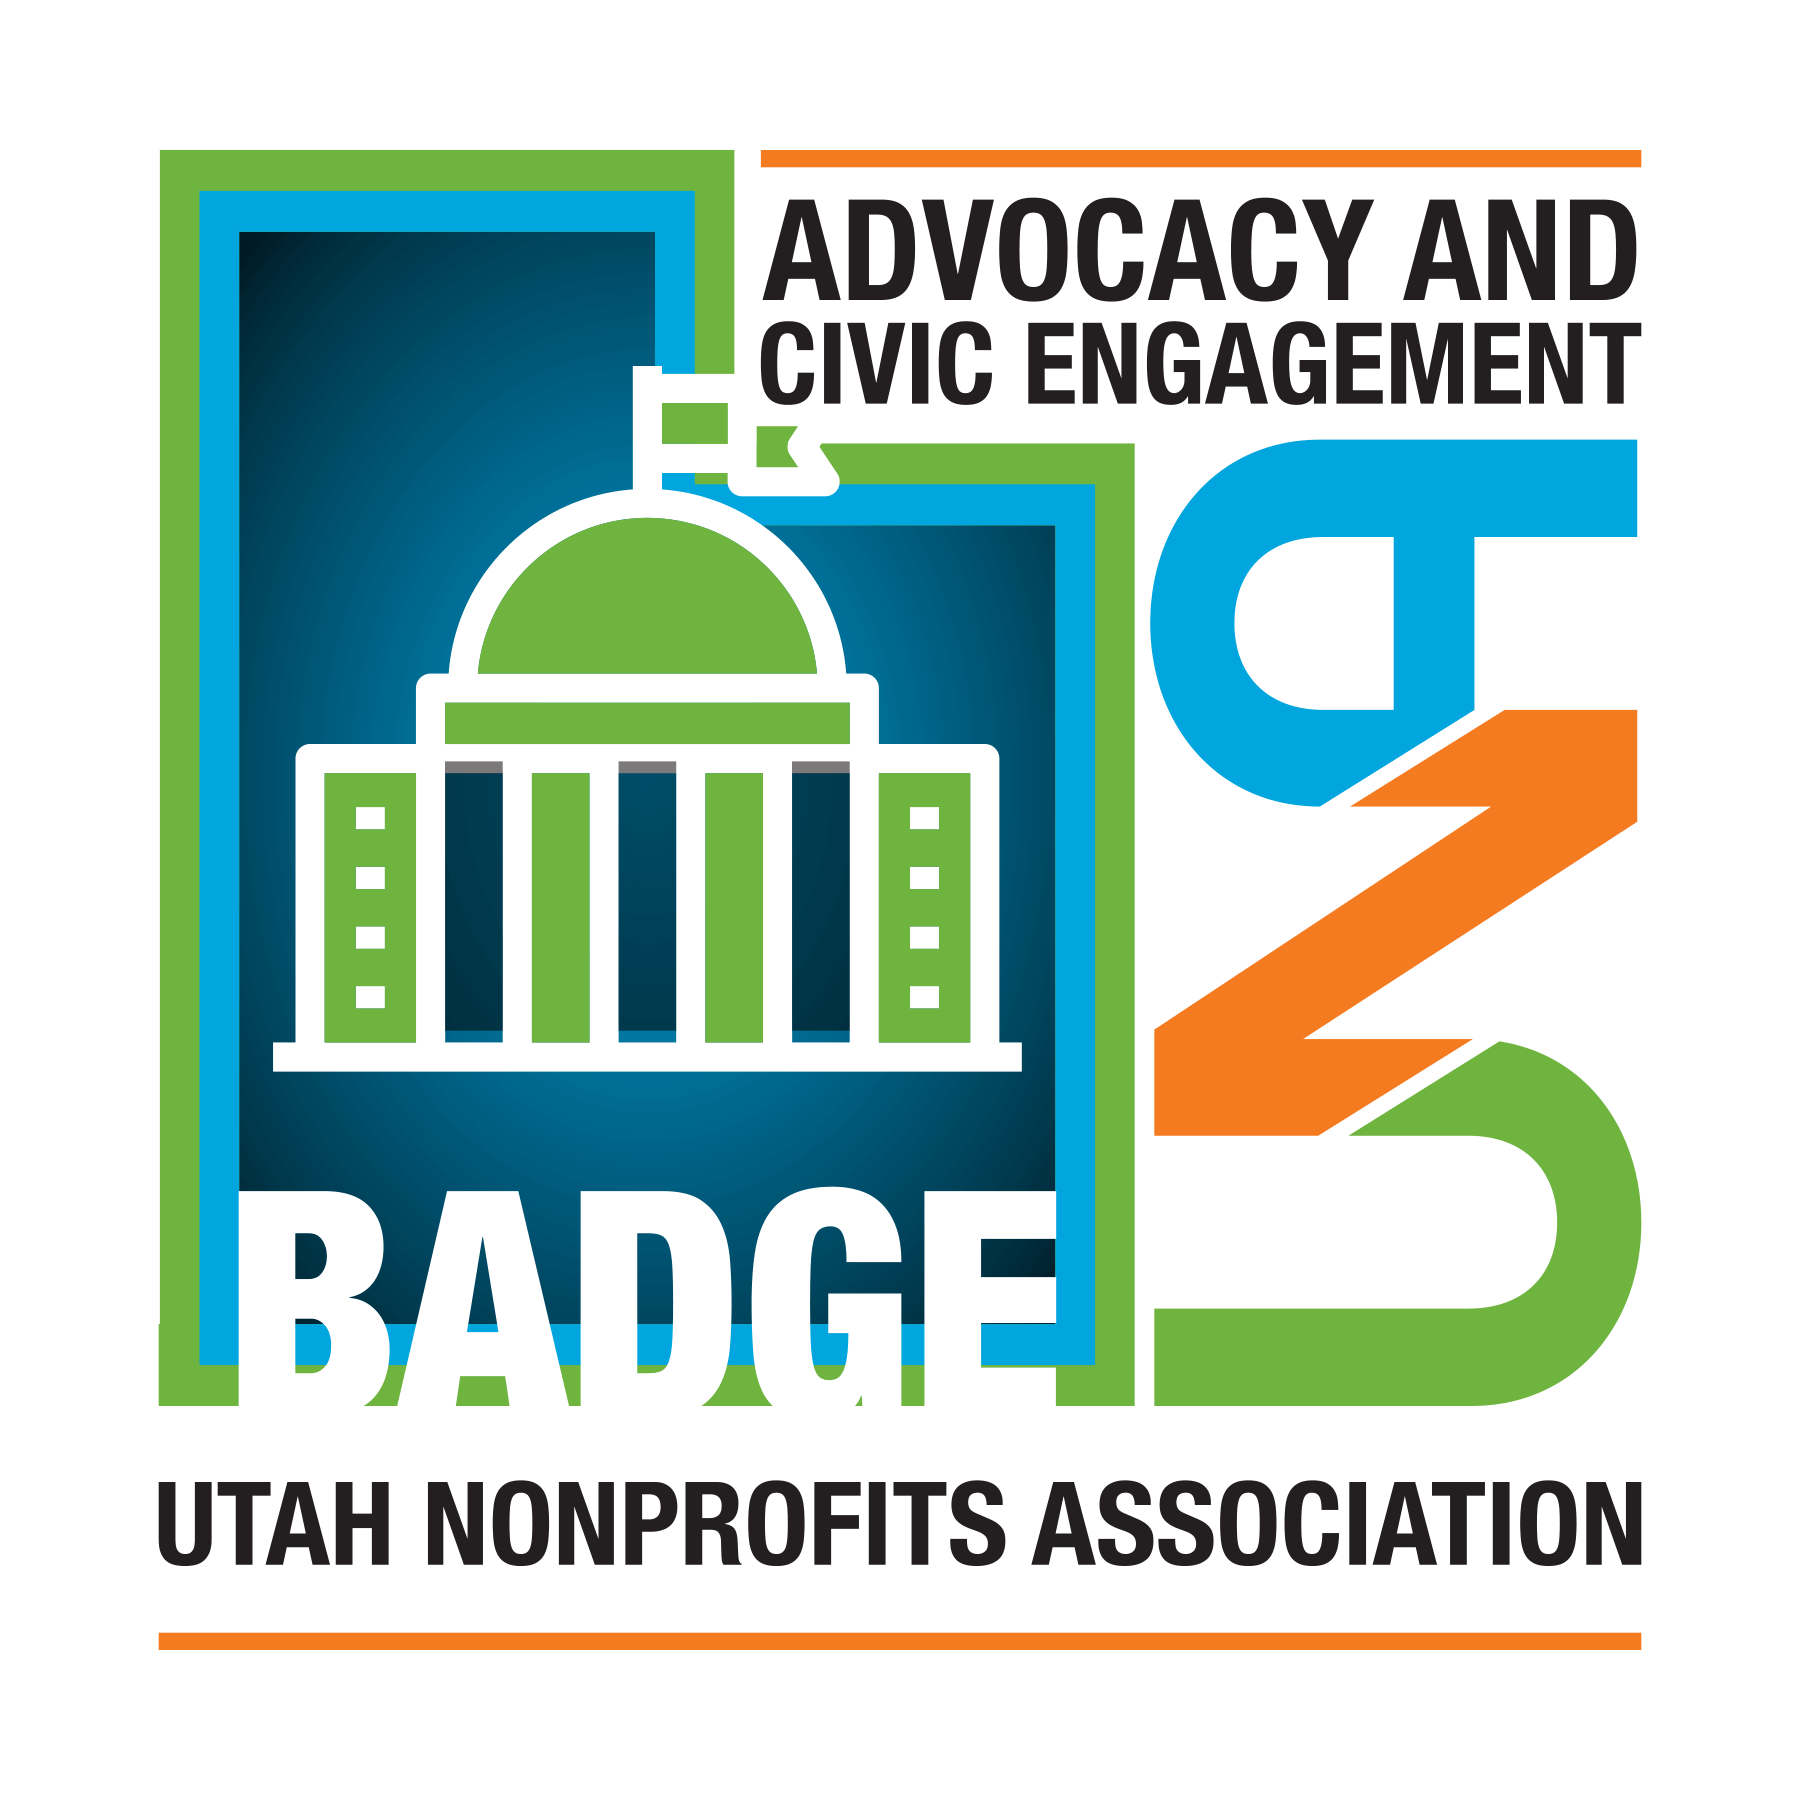 UNA Nonprofit Credential Badge for Advocacy and Civic Engagement